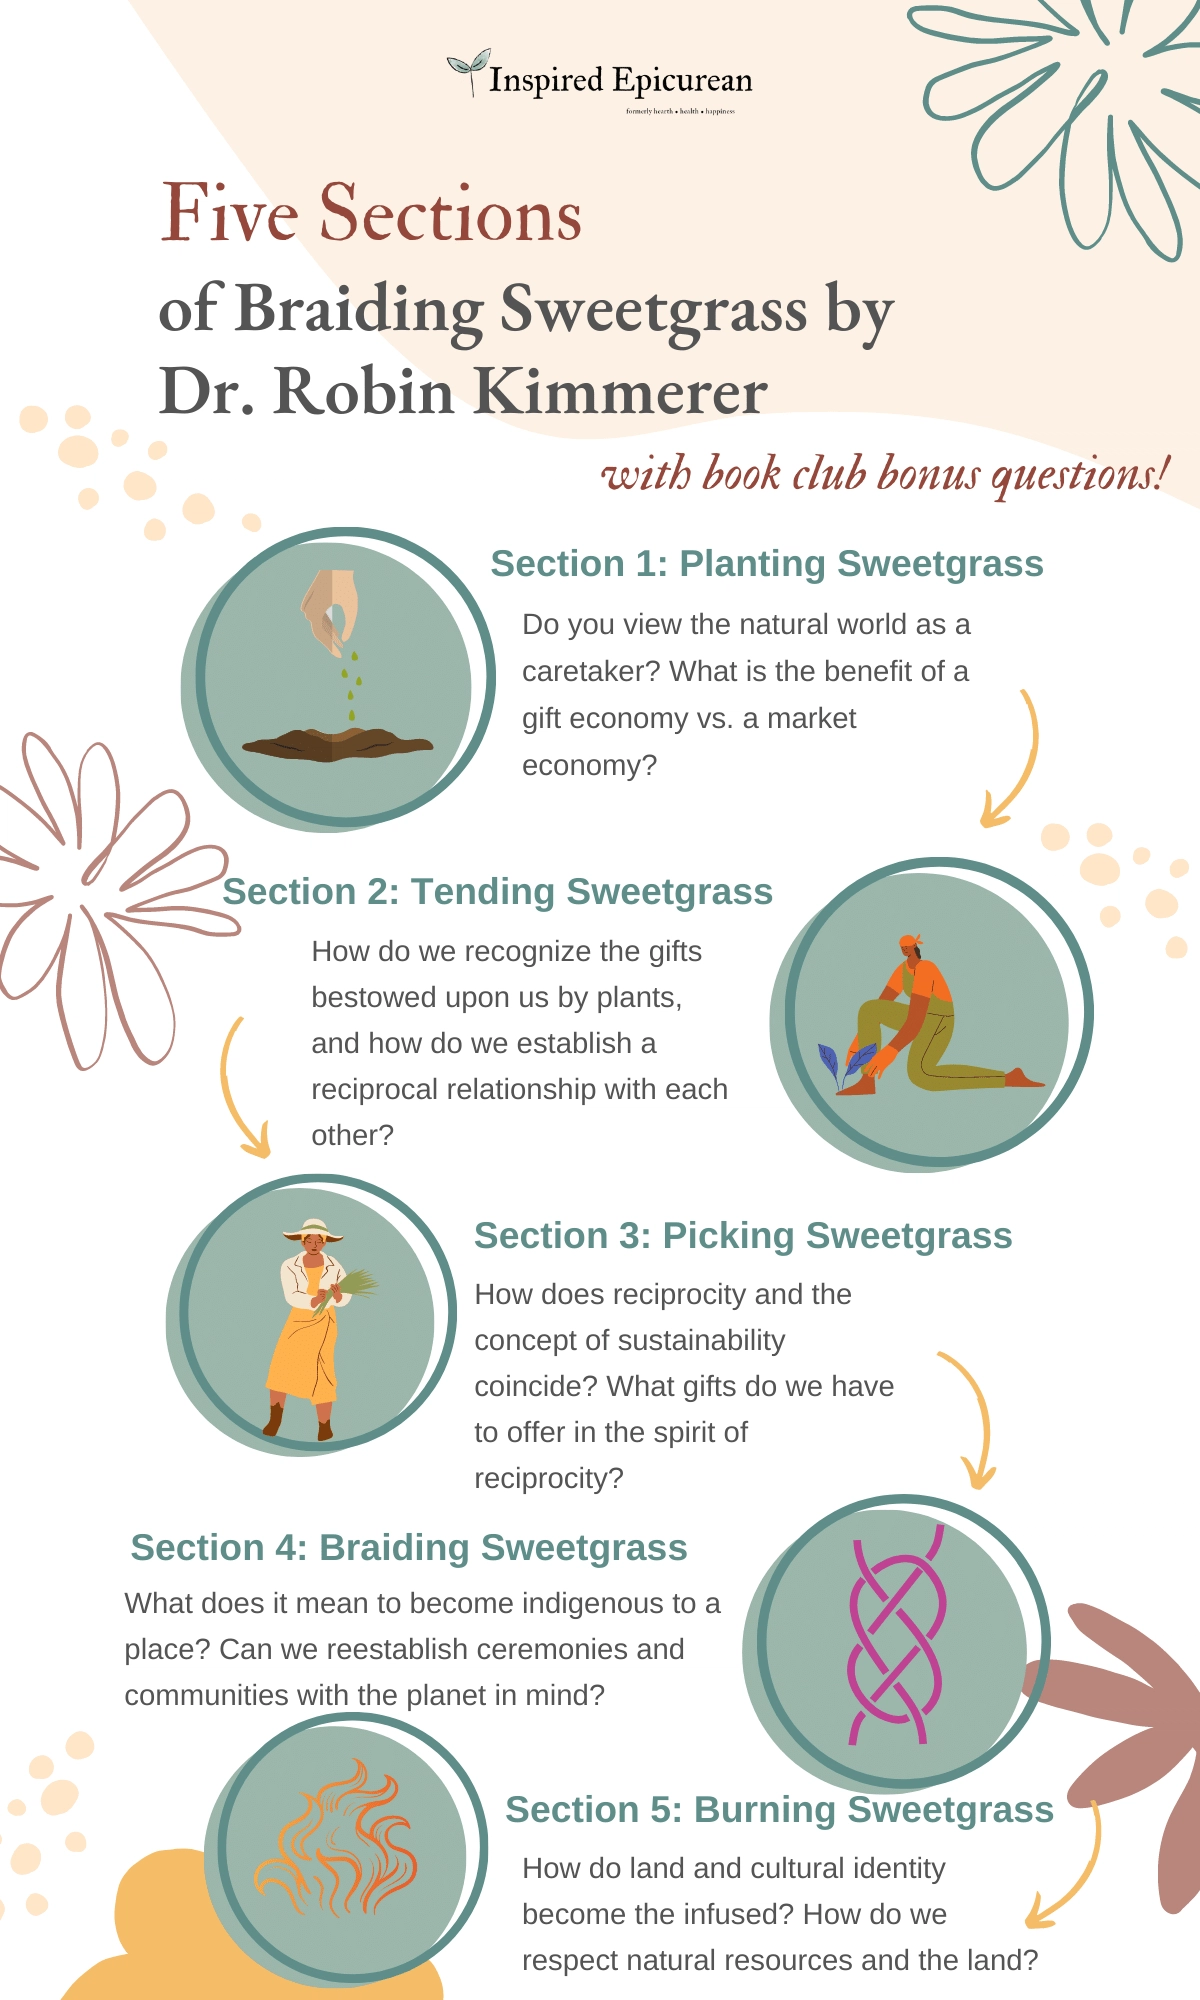 infographic discussing the five sections of braiding sweetgrass